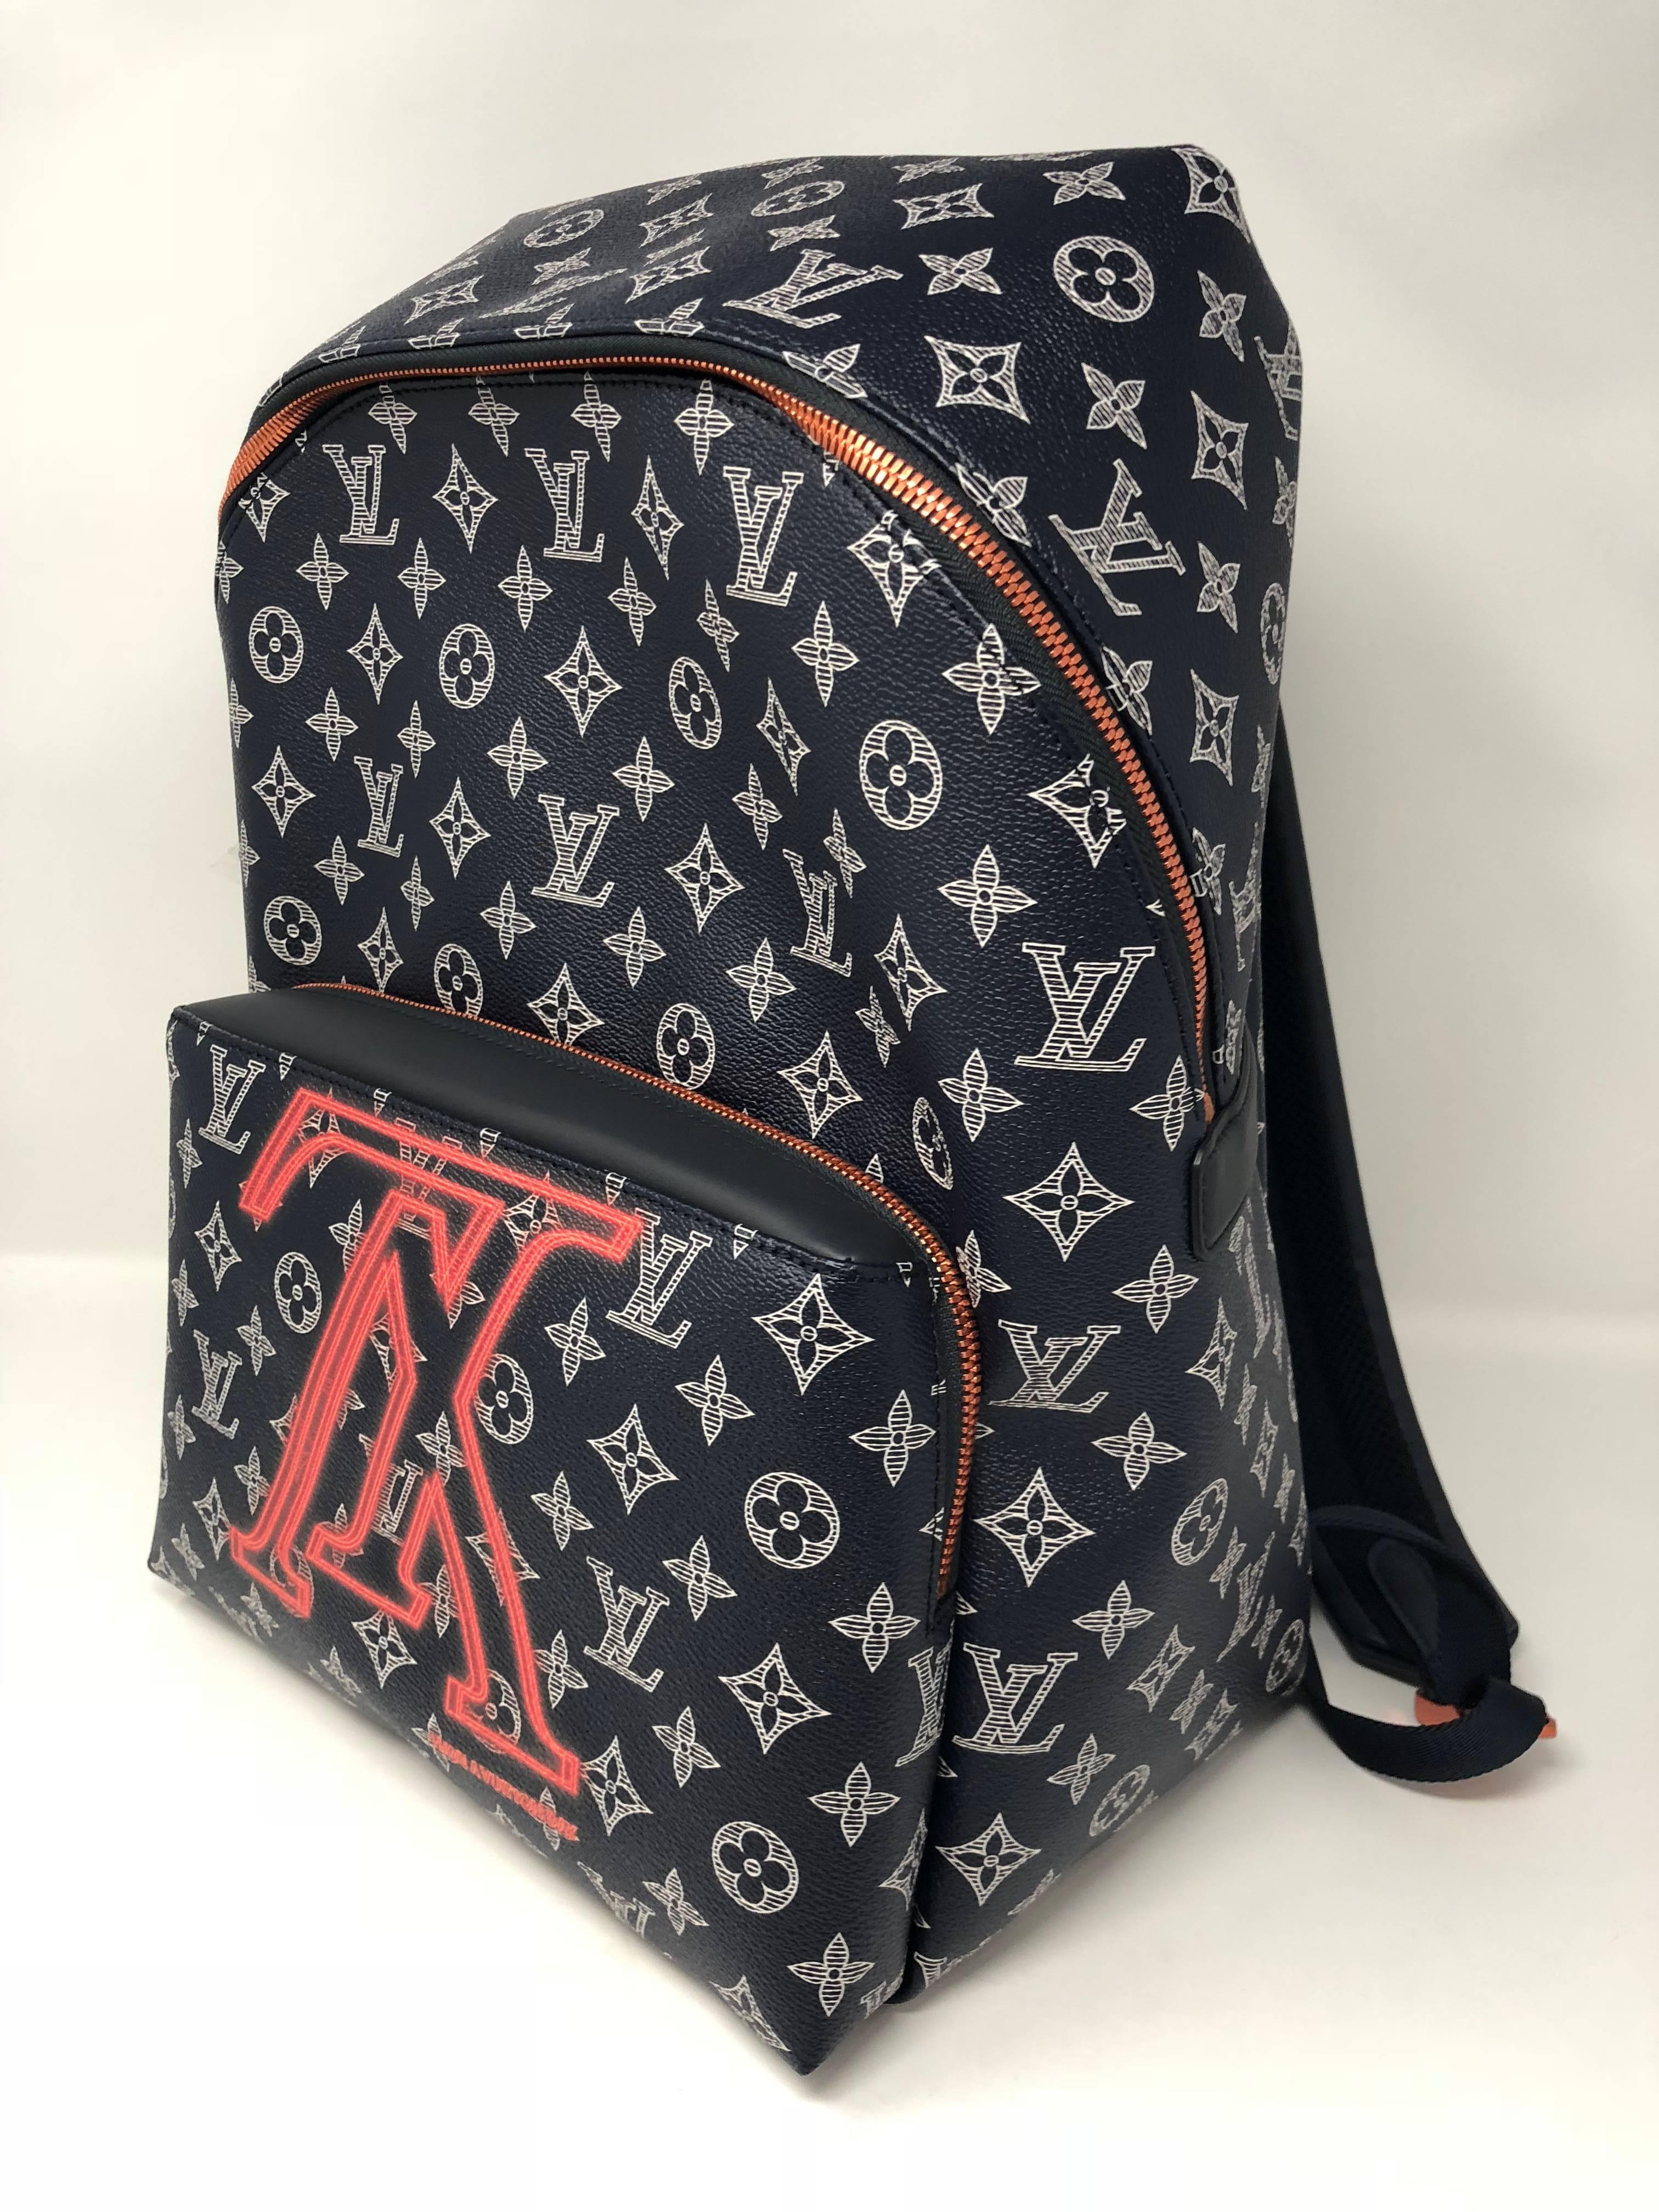 Louis Vuitton Apollo Upside Down Backpack in ink monogram. Brand new with dust cover and LV box. Color is navy monogram with pink lettering. The Upside down signature in pink. Sold out collection in high demand. 